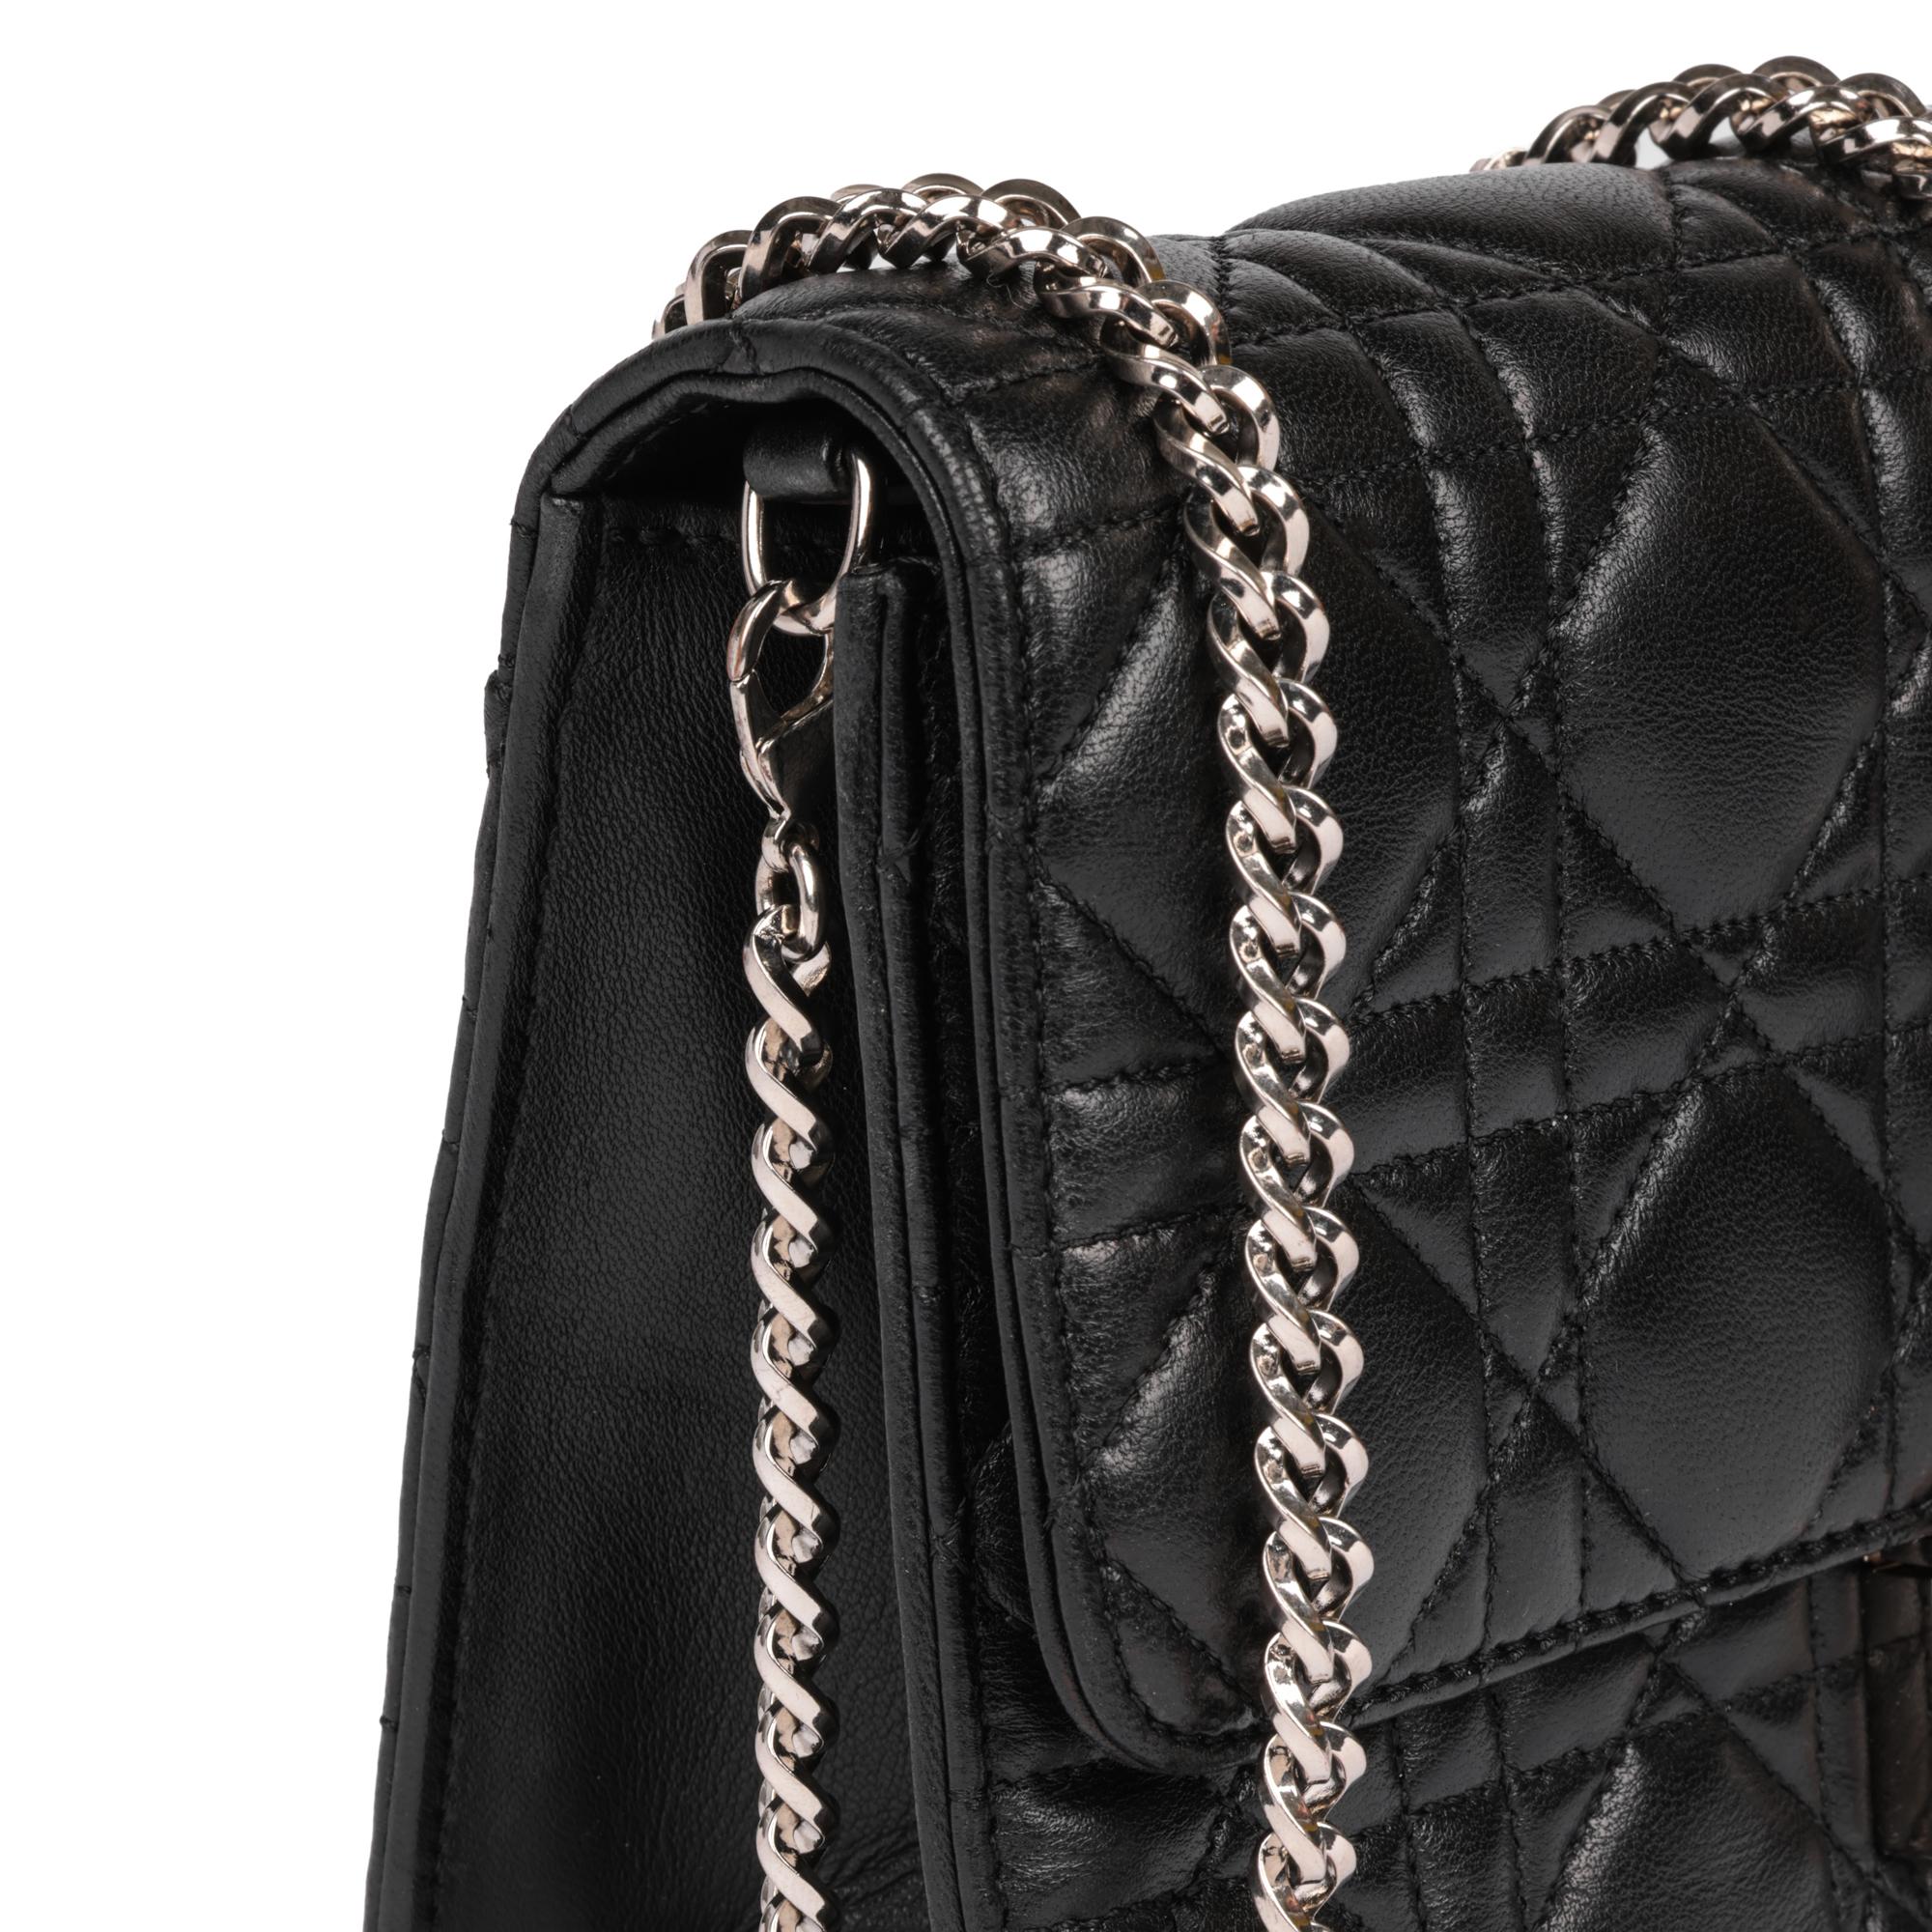 CHRISTIAN DIOR Black Quilted Lambskin Miss Dior Flap Bag 1